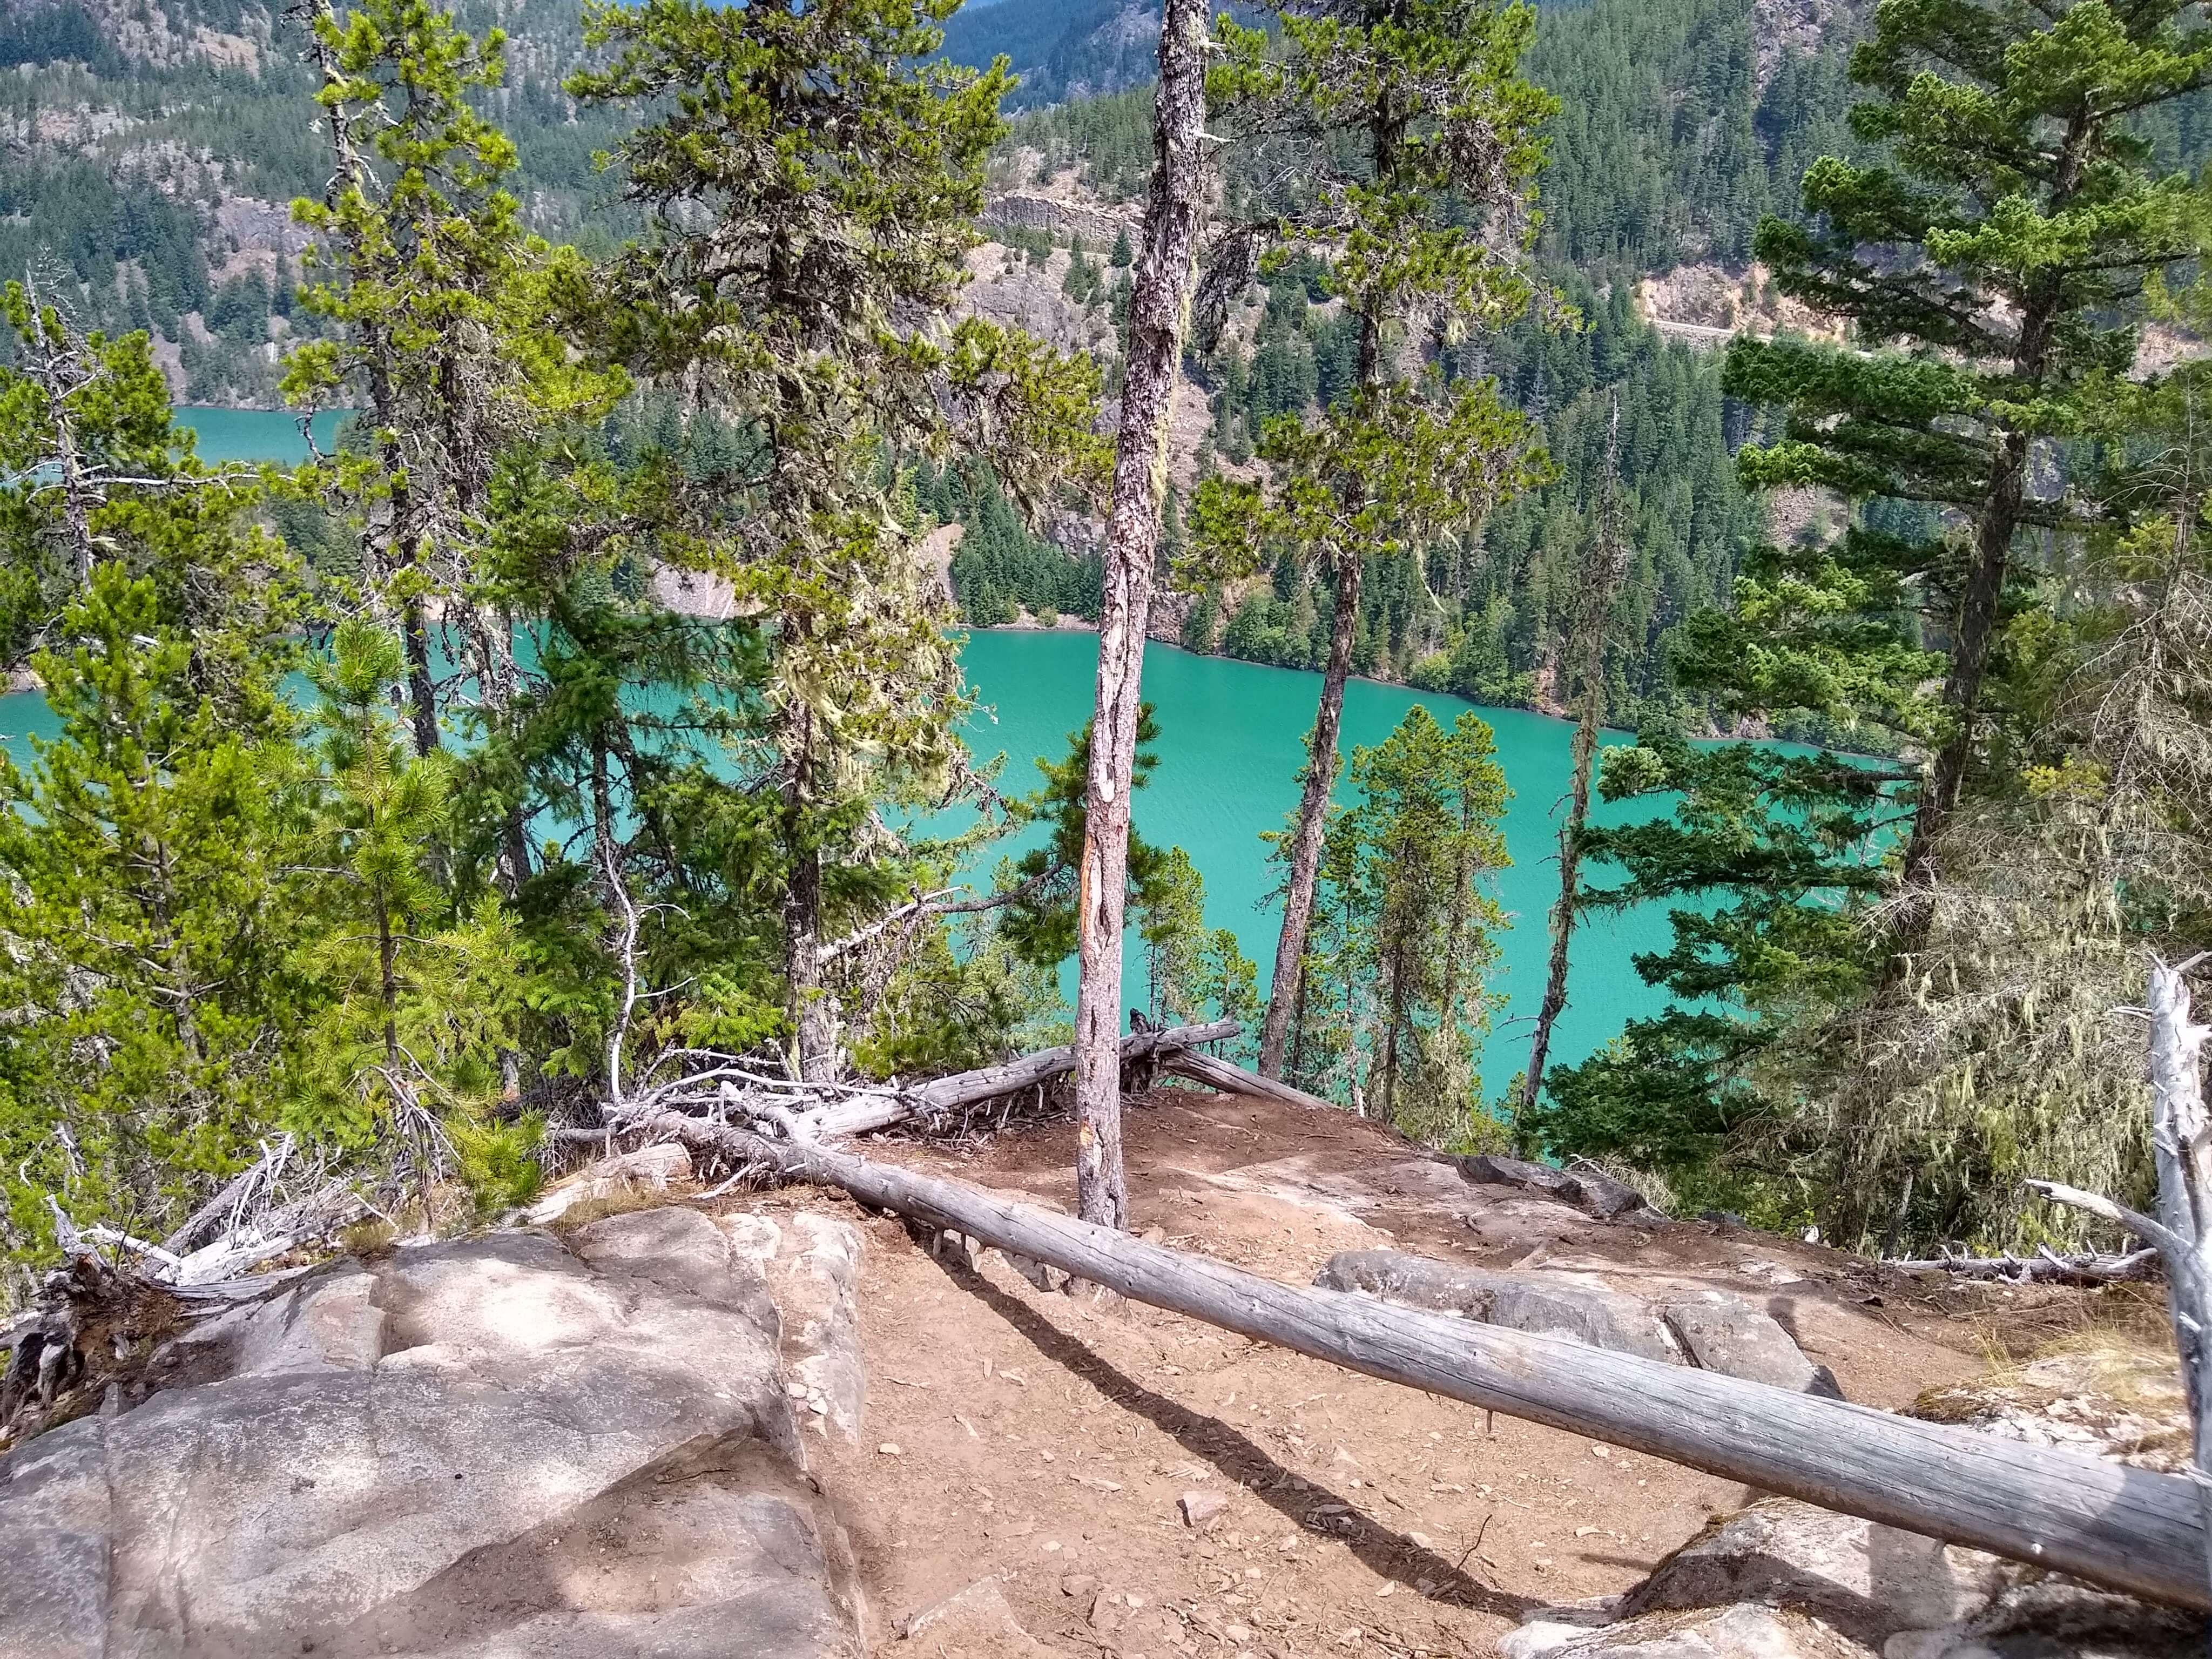 View of Diablo Lake's turquoise water from Thunder Knob in North Cascades National Park